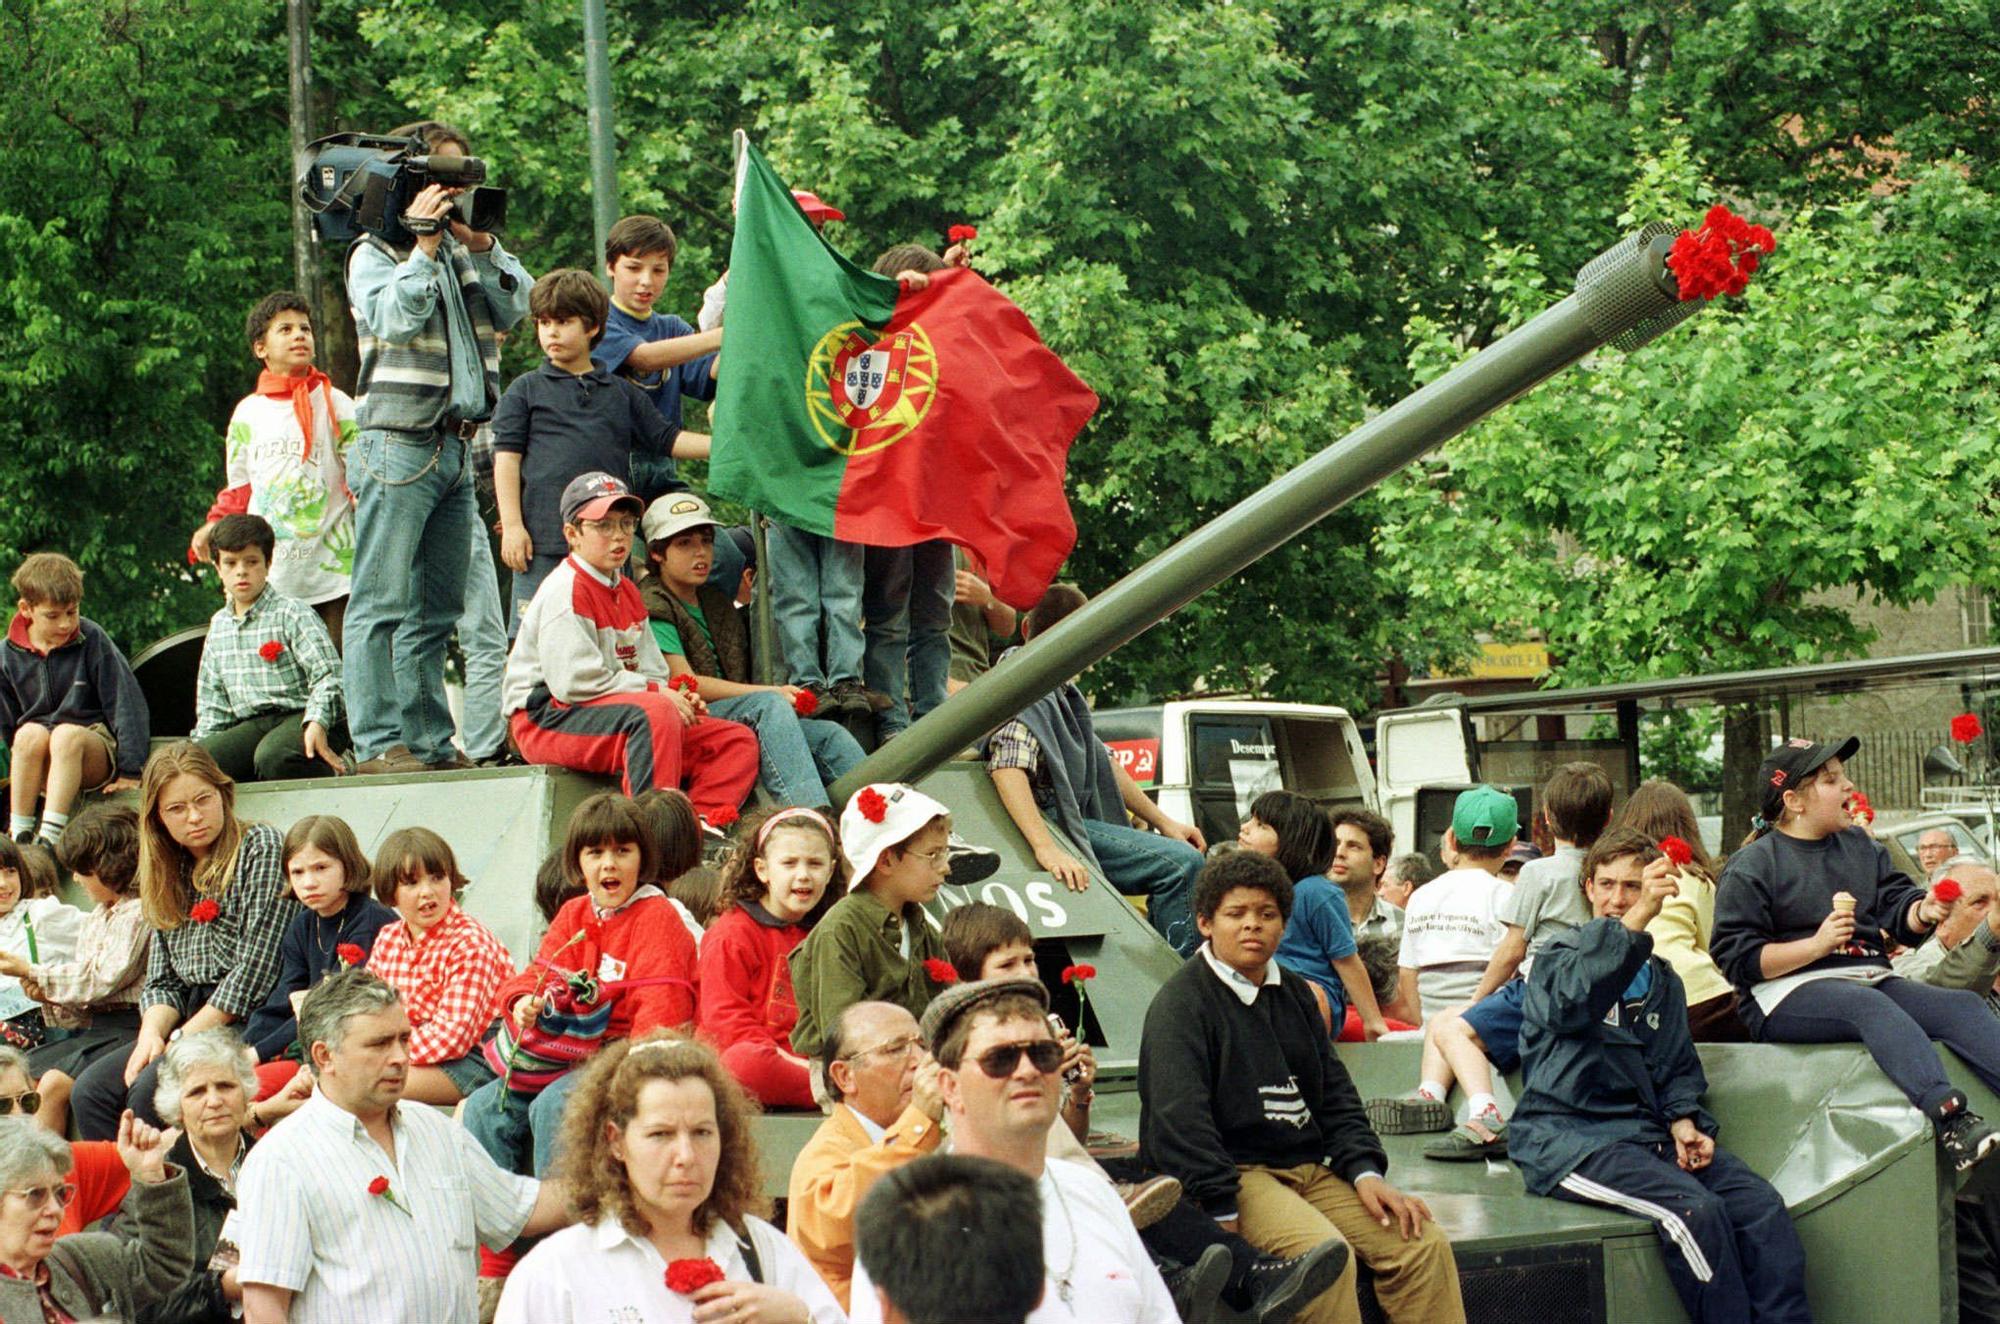 Celebración del 23 aniversario de la Revolución de los Claveles en Lisboa.Kids on top of a military tank hold up carnations singing during the demonstration celebrating the 23th anniversary of the Carnations Revolution in Lisbon's Liberdade Avenue, Friday April 25 1997. Carnations are the symbol of the 1974 Portuguese Revolution which was been made by the military, ending with 48 years of dictatorship government. (AP Photo/Luisa Ferreira) / Tanque.